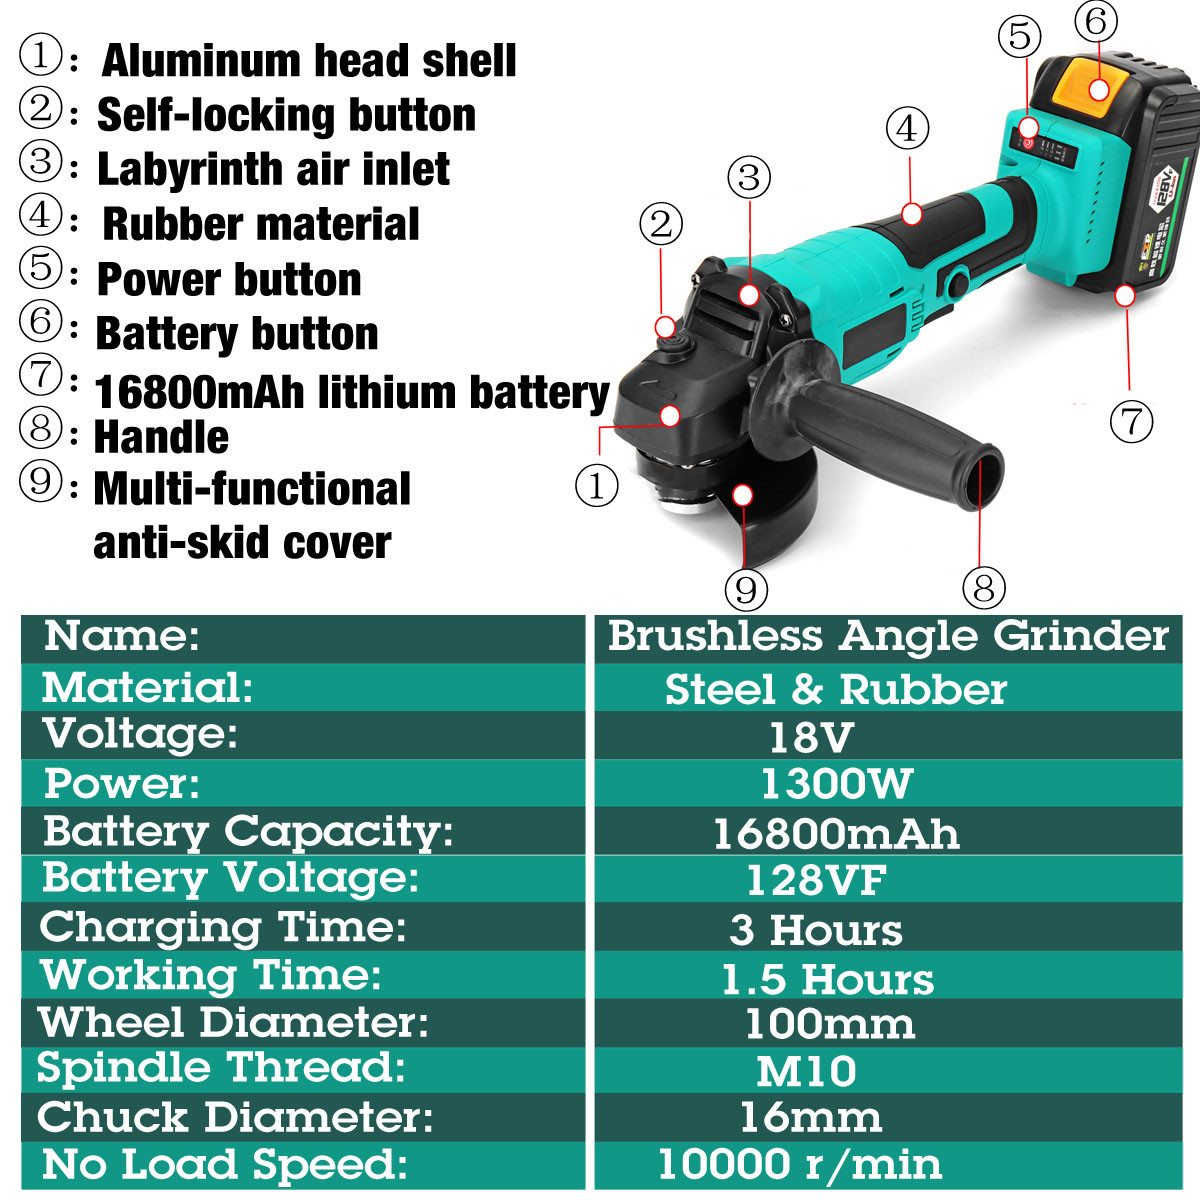 128VF-1300W-10000RPM-Cordless-Brushless-Angle-Grinder-with-16800mAh-Li-Ion-Battery-1520444-3